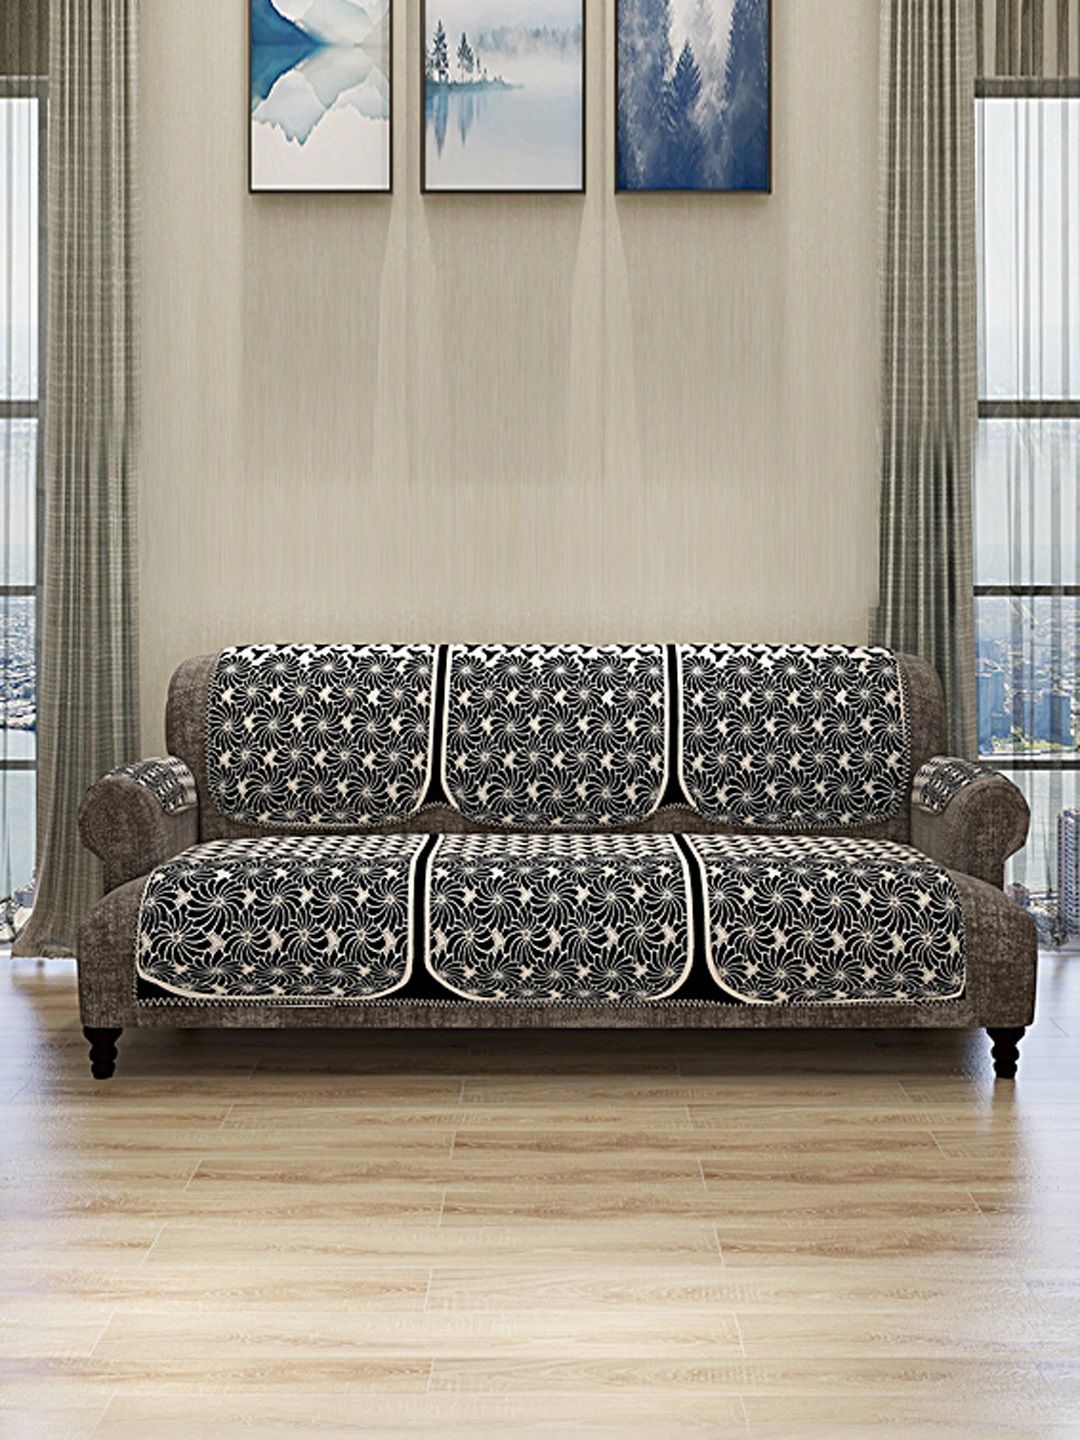 ROMEE Set Of 12 White & Black Self Design 5-Seater Sofa Cover With 6 Arm Covers Price in India